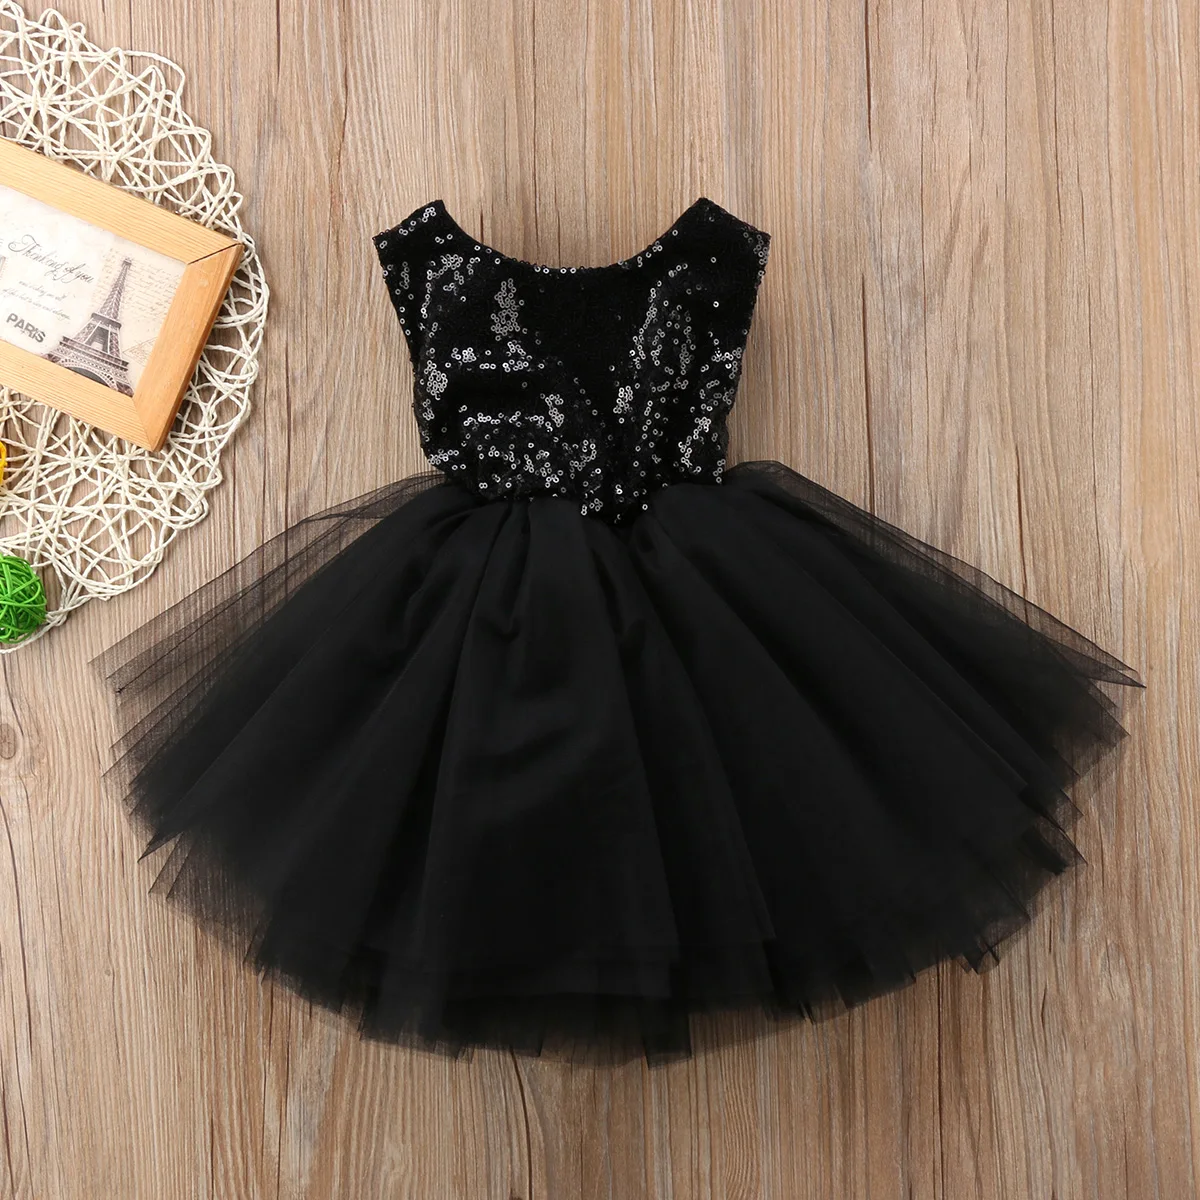 Sequins Kids Babys Girls Clothes Sleeveless Lace Flower Dress Tutu Party Dress Backless Bridesmaid Dresses Kid Baby Girl Clothes